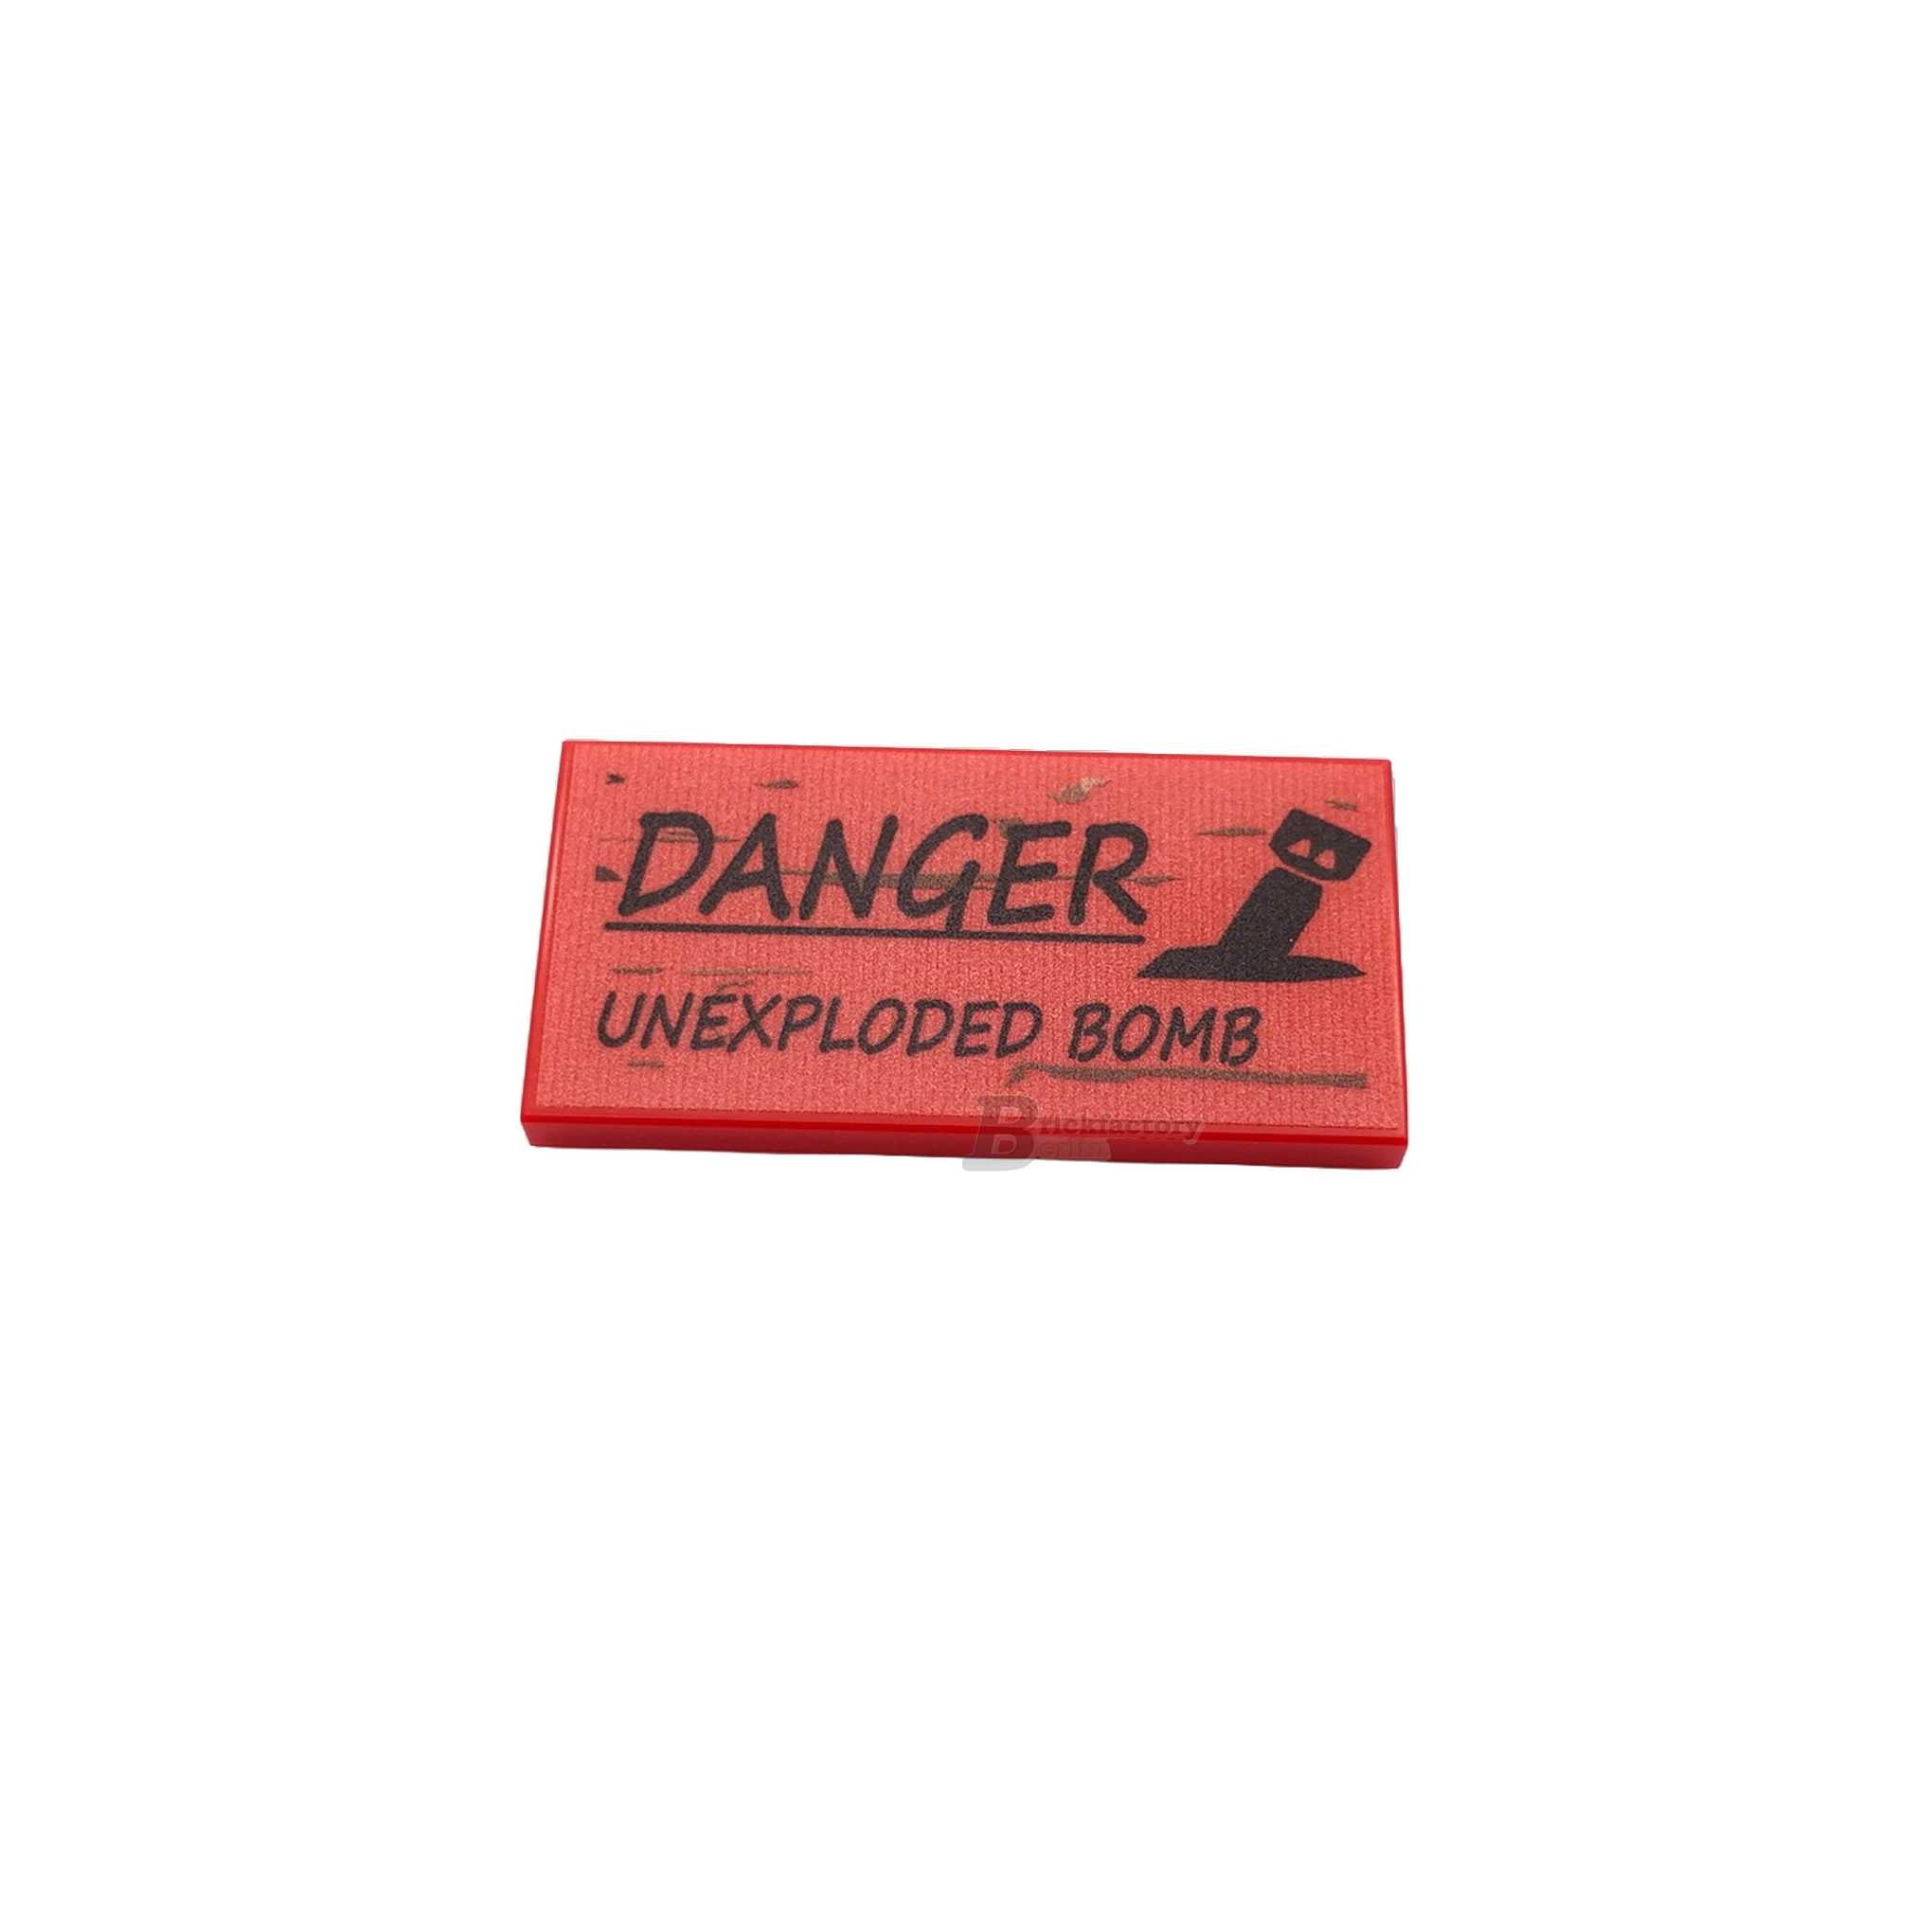 BF-0608 - Danger unexploded bomb (Farbe: Red) Bedruckte LEGO®-Fliese-2x4)